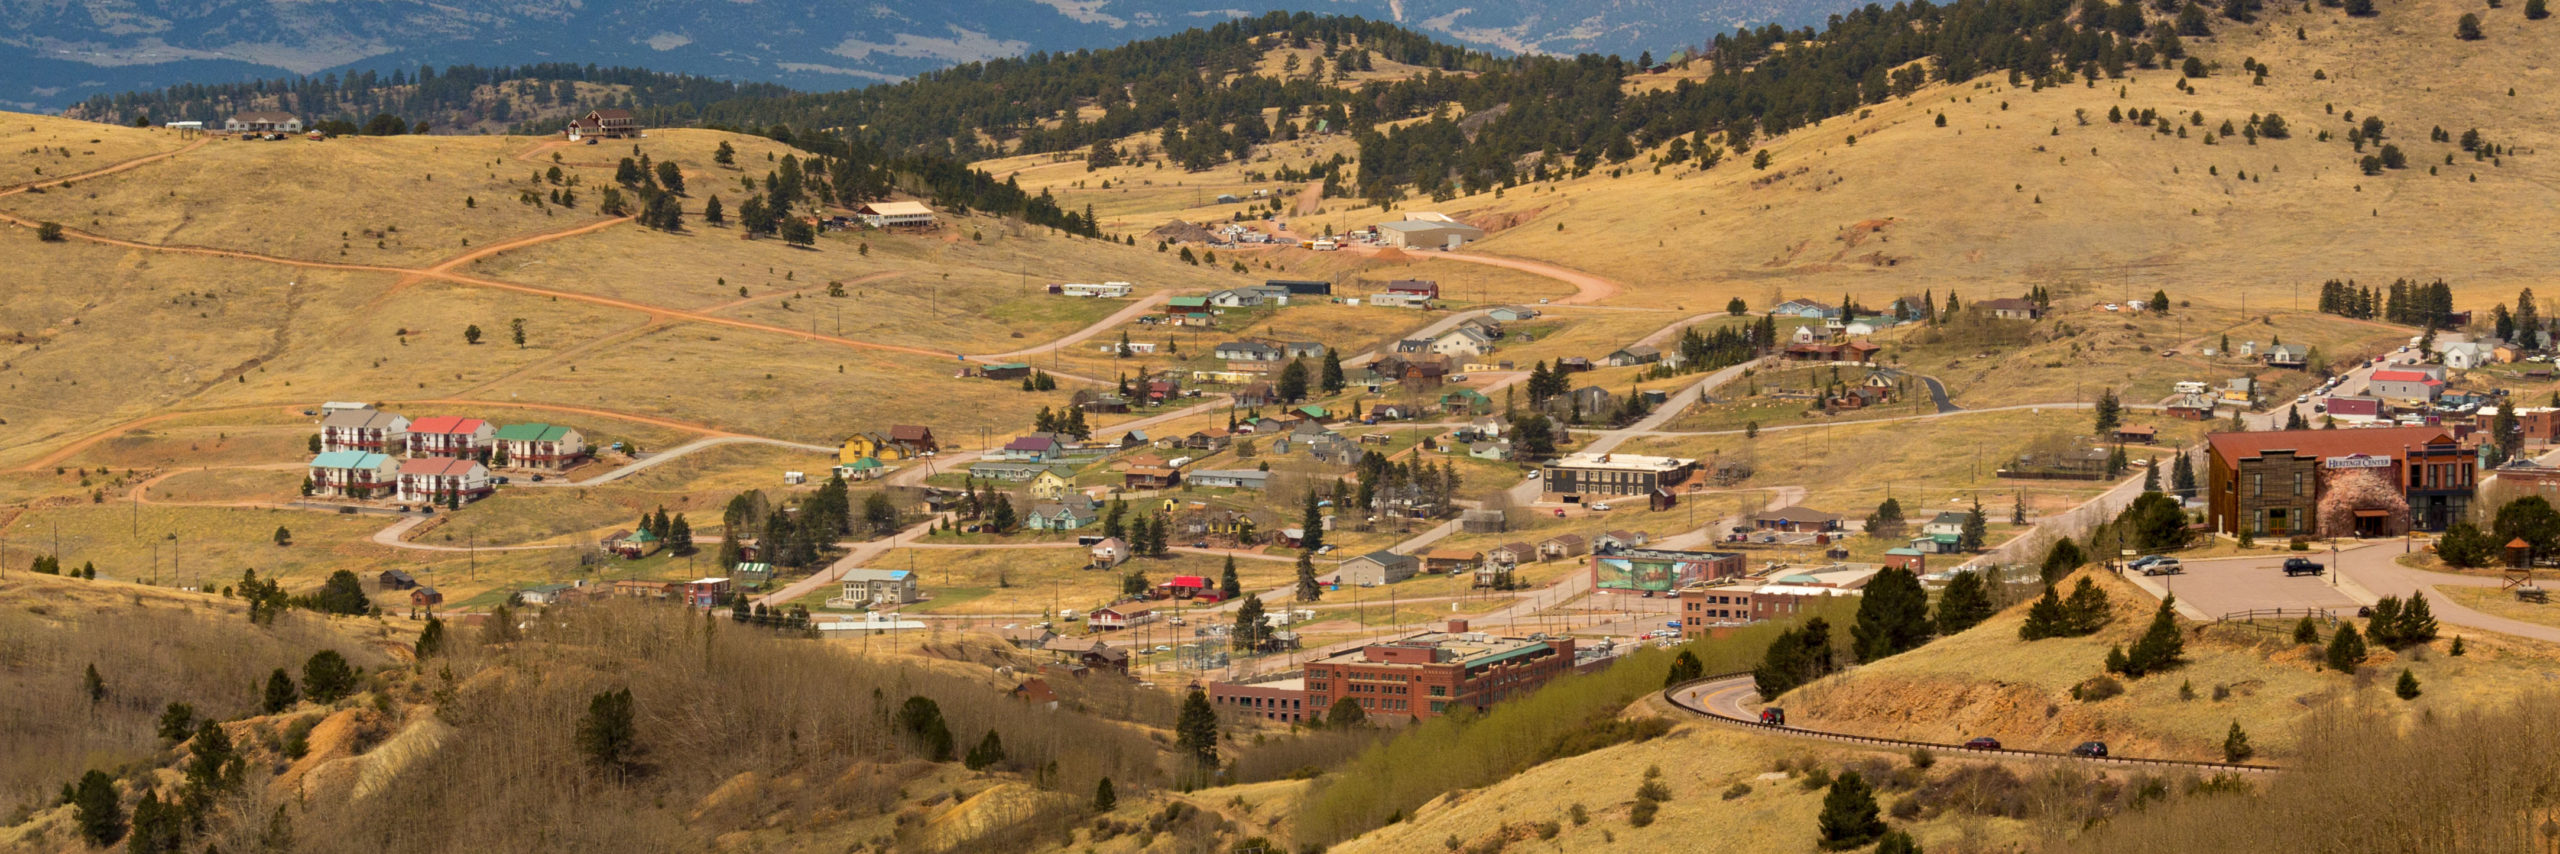 View from overlook of fun things to do in the summer at the mining town of Cripple Creek and the Sangre De Cristo mountain range